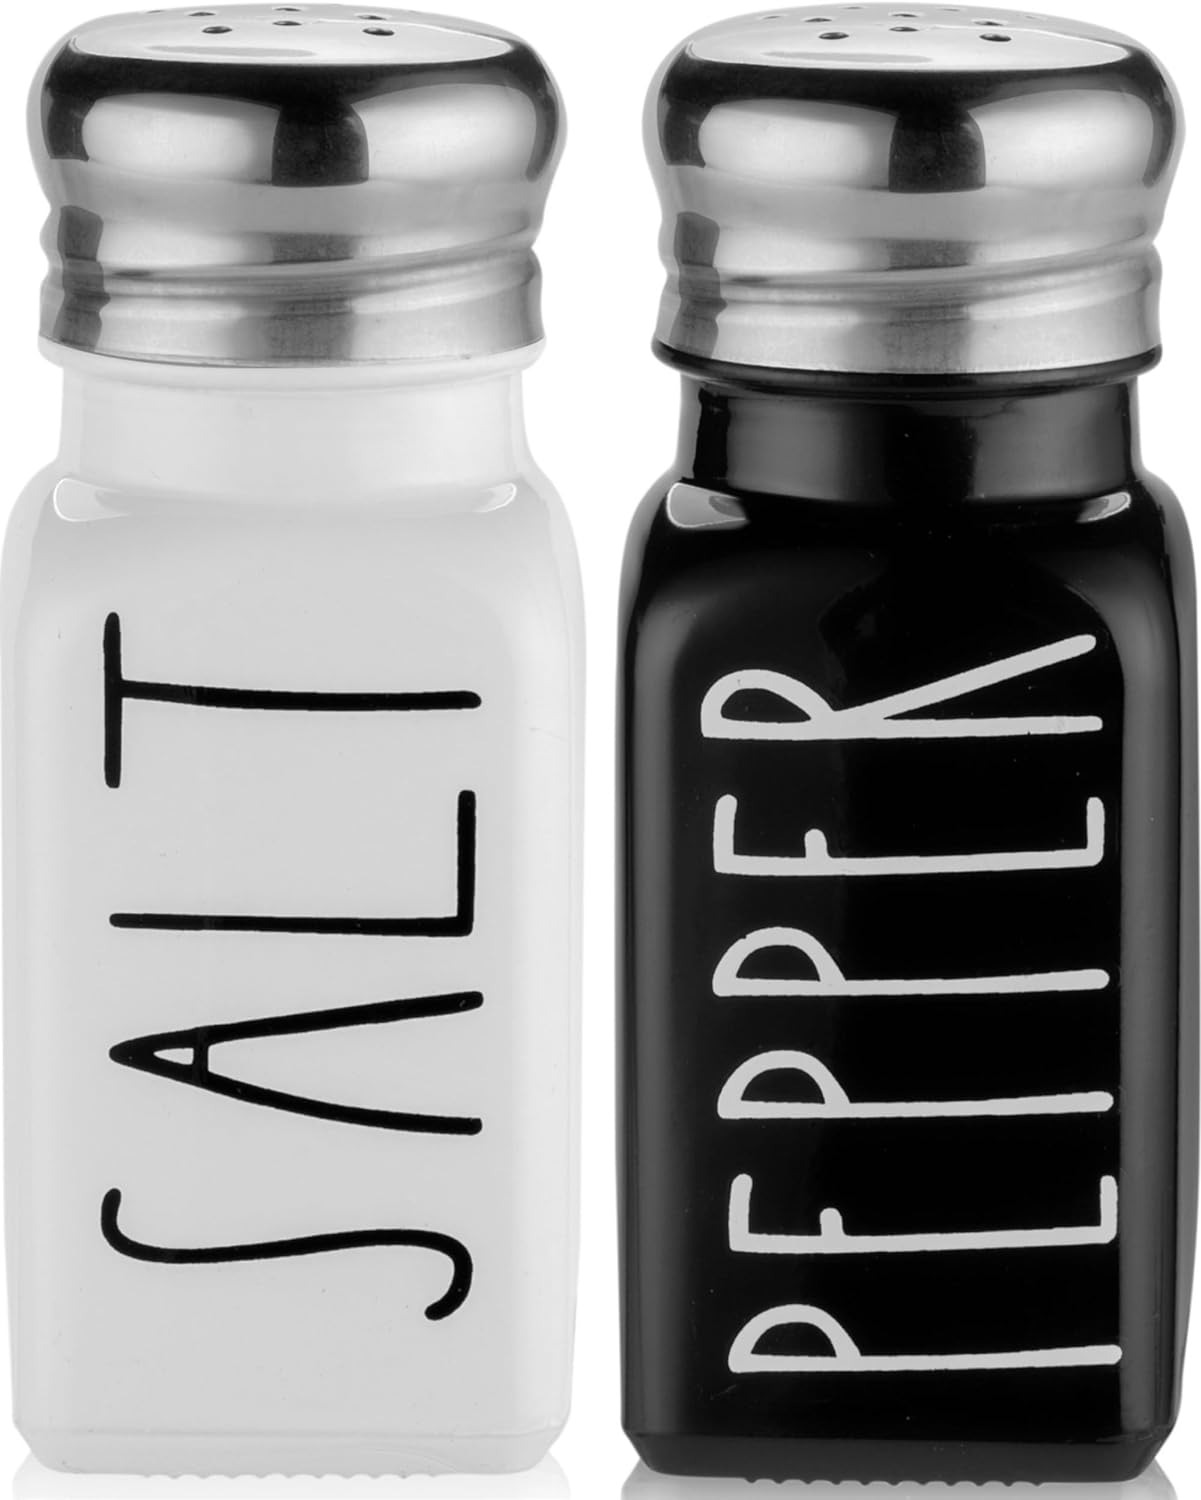 Salt and Pepper Shakers Set by Cute Modern Farmhouse Kitchen Decor for Home 